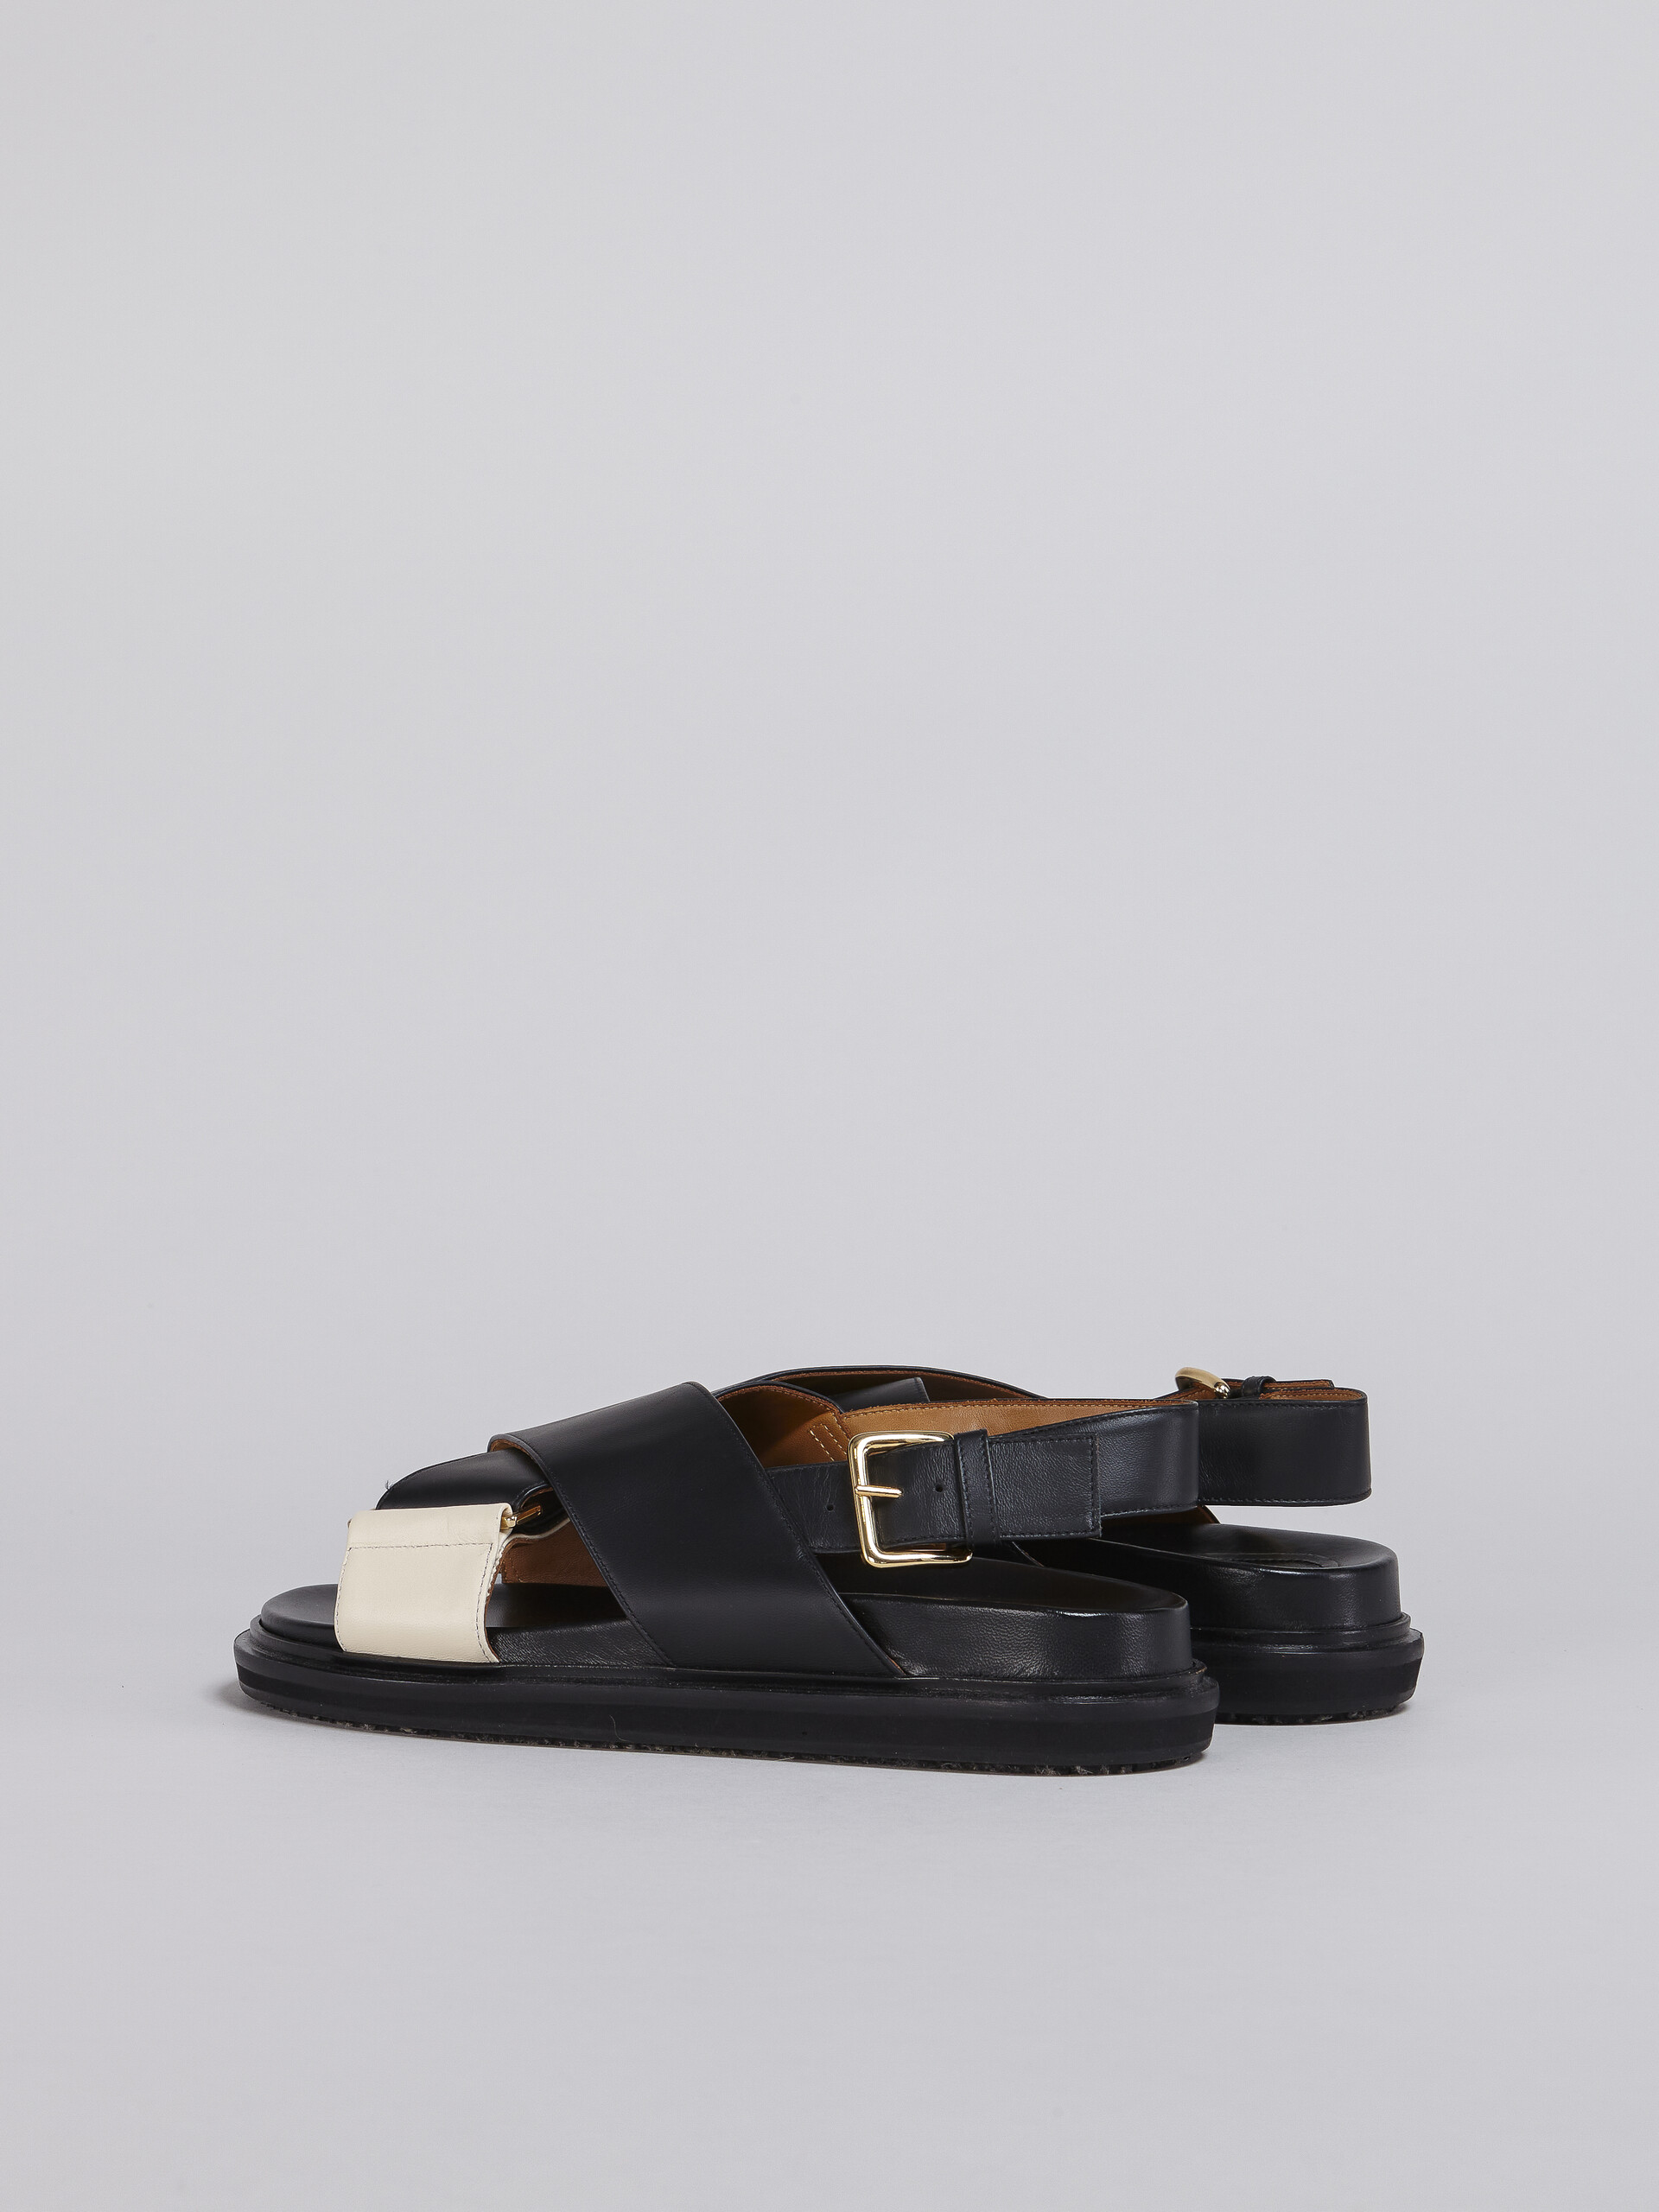 Black and white smooth calf leather fussbett - Sandals - Image 3